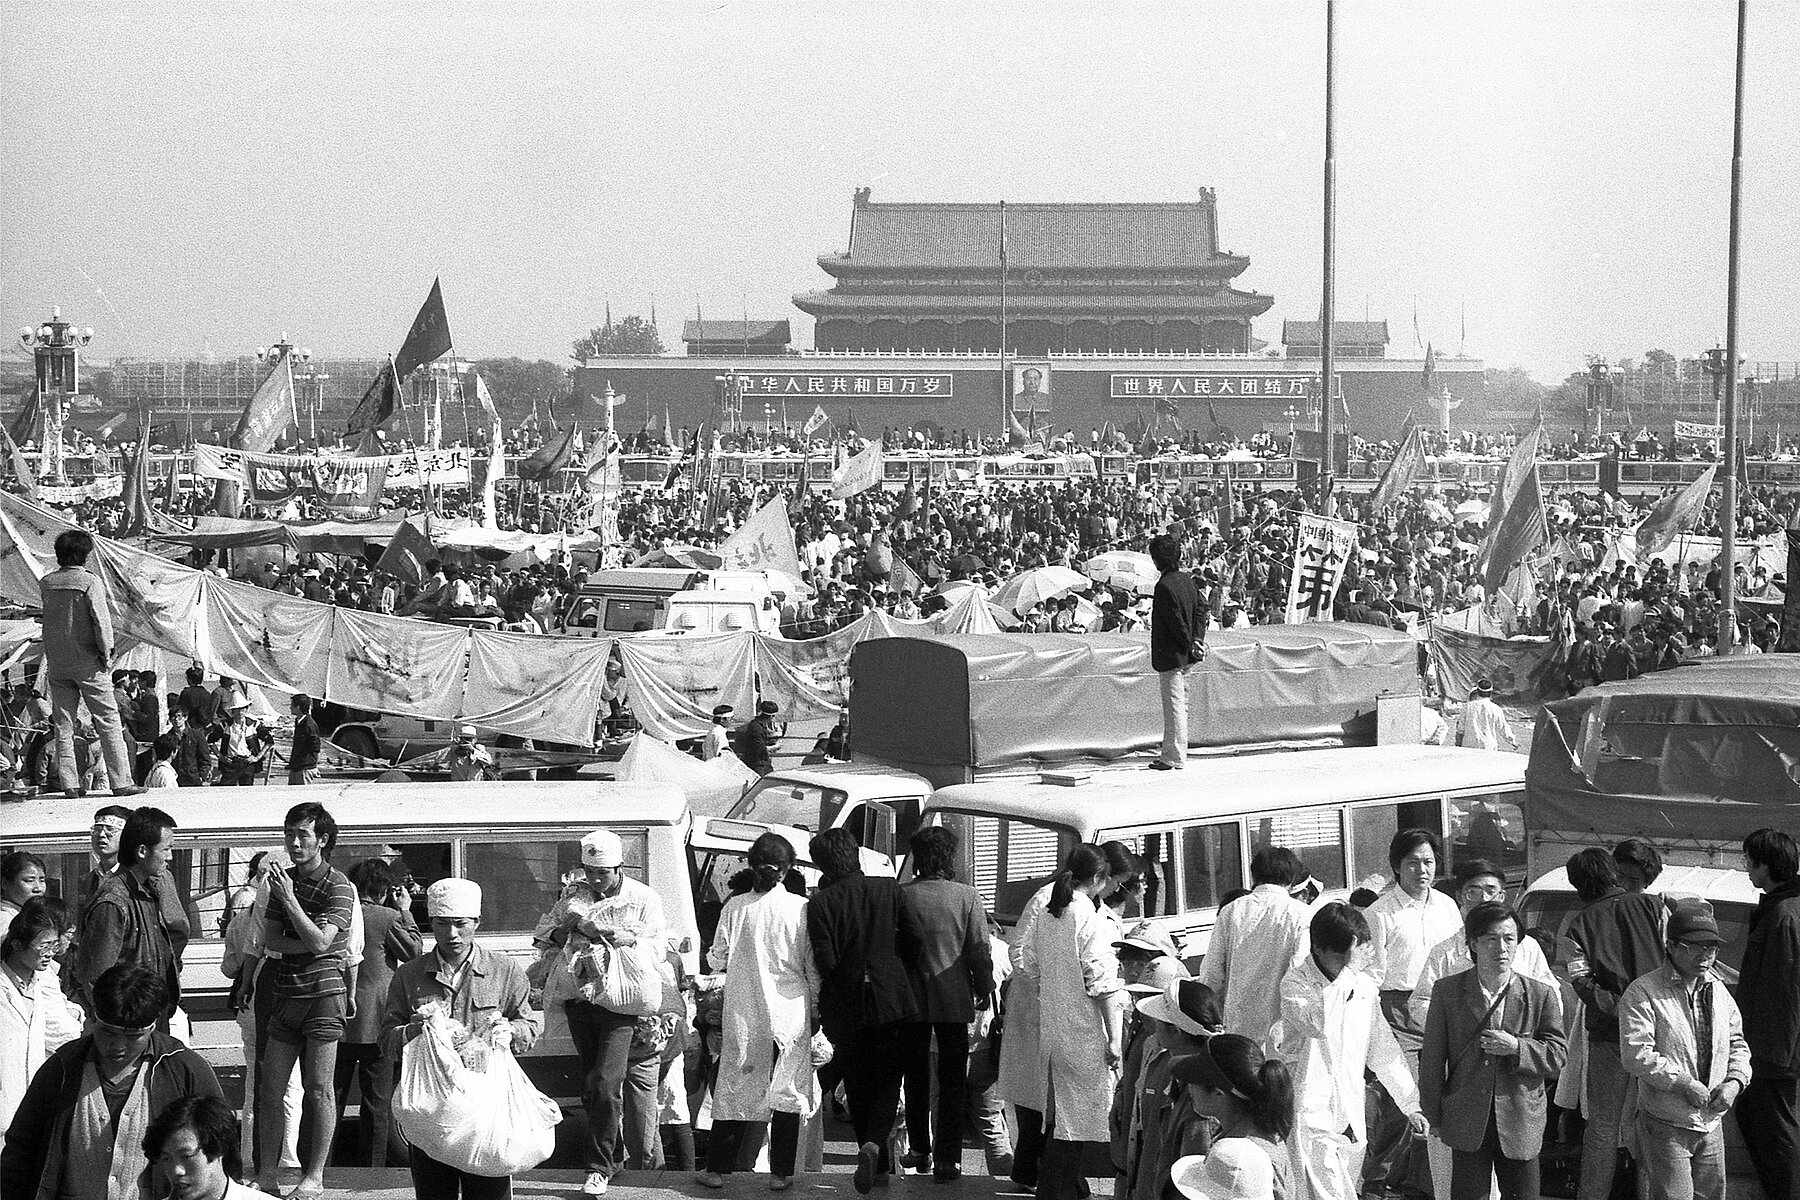 A huge crowd of students on Tiananmen Square in Beijing, with the Forbidden City in the background.